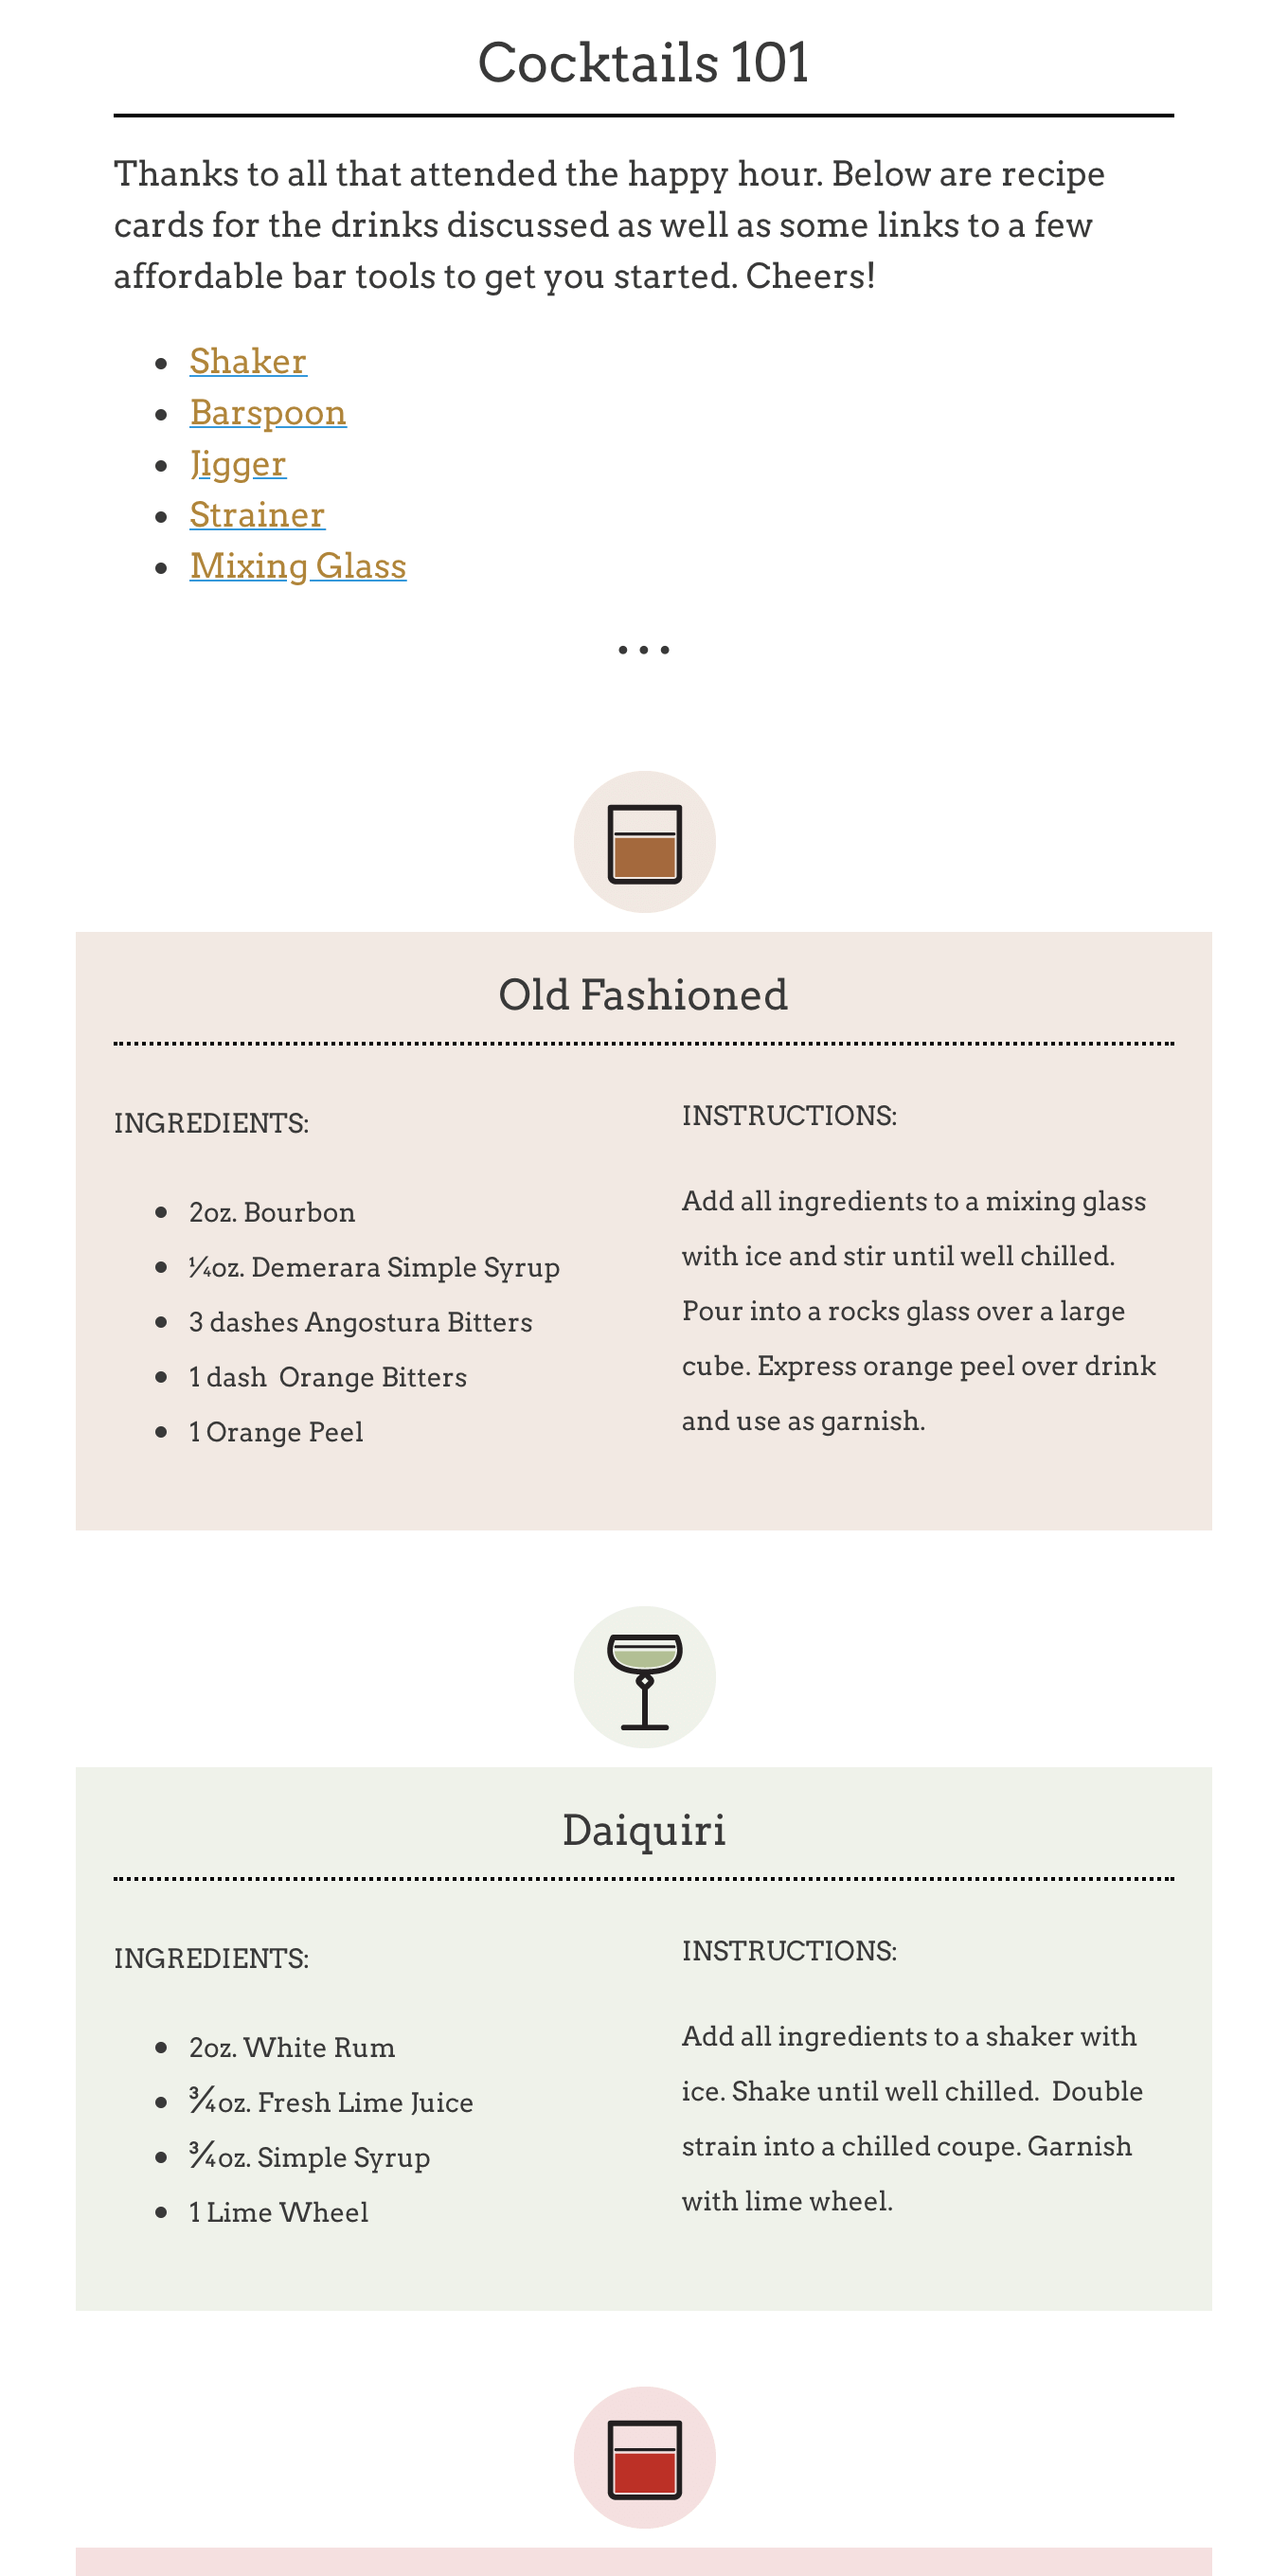 Your Cocktails 101 Recipes 🥃